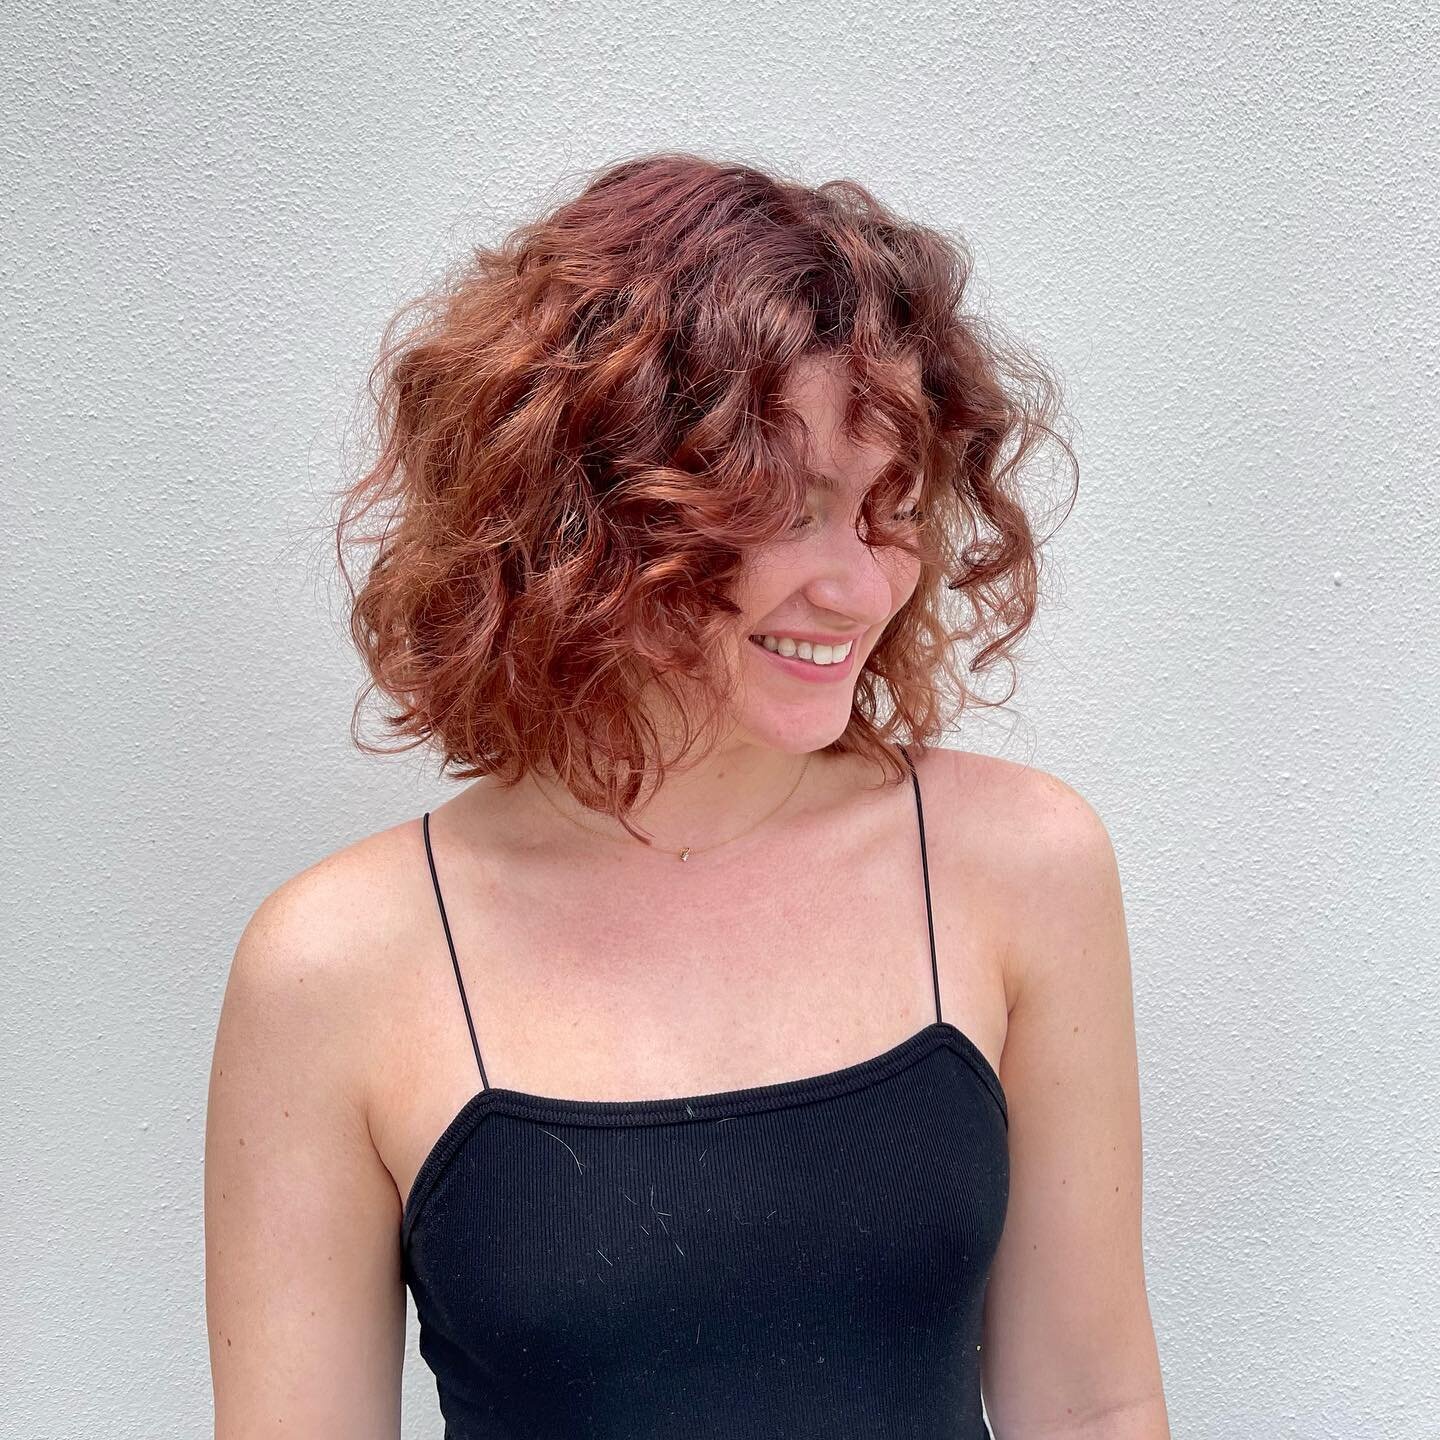 Heath took Jamie from grown out blonde to this coppery auburn. Big hair change for a big career change. Cut and color by Heath.